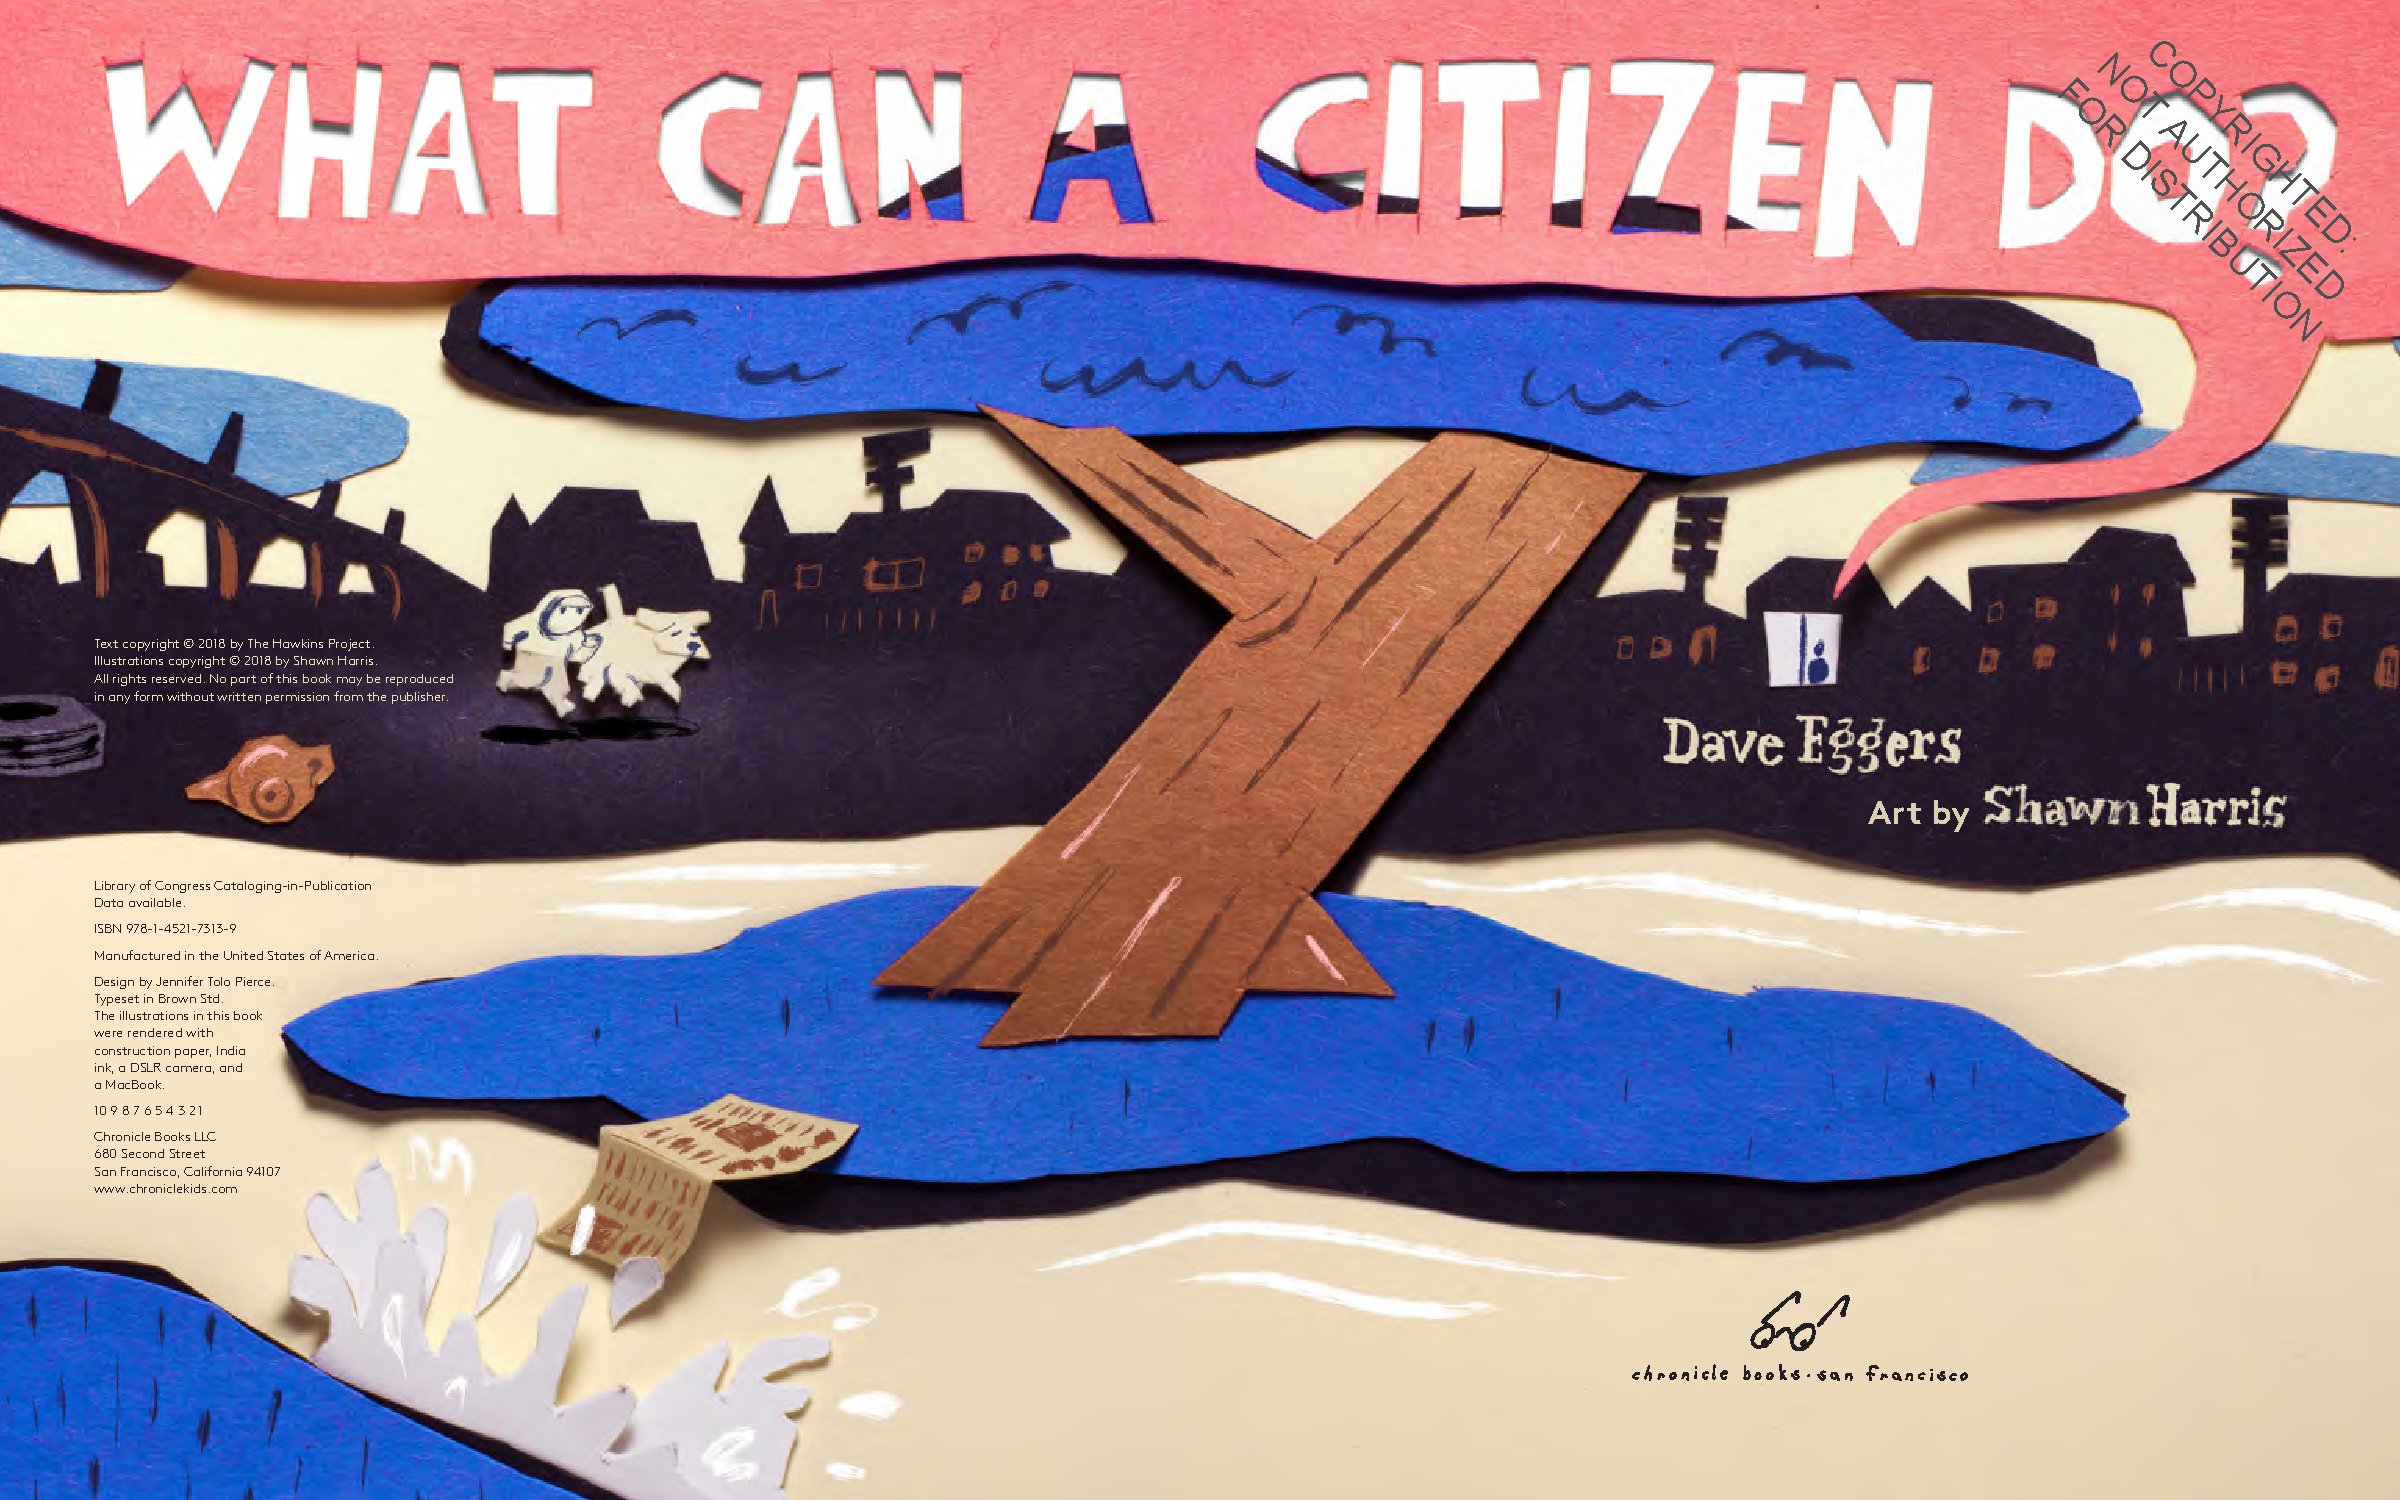 What Can a Citizen Do?